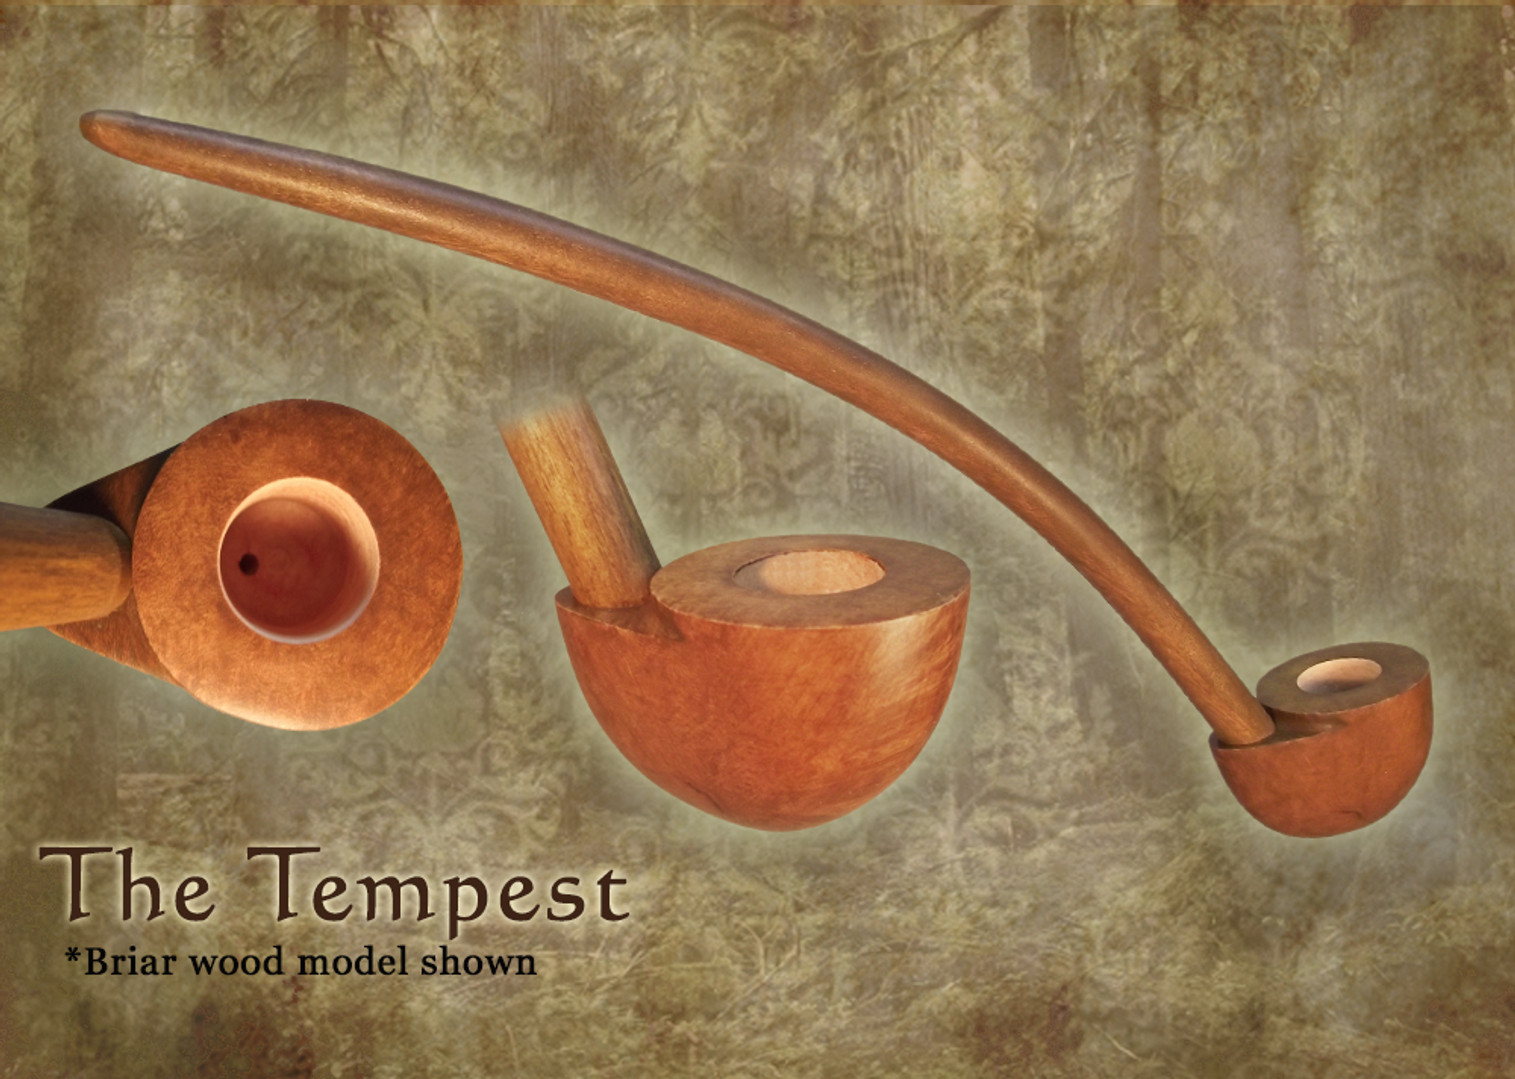 MacQueen Pipes 'The Tempest' - Briar Wood